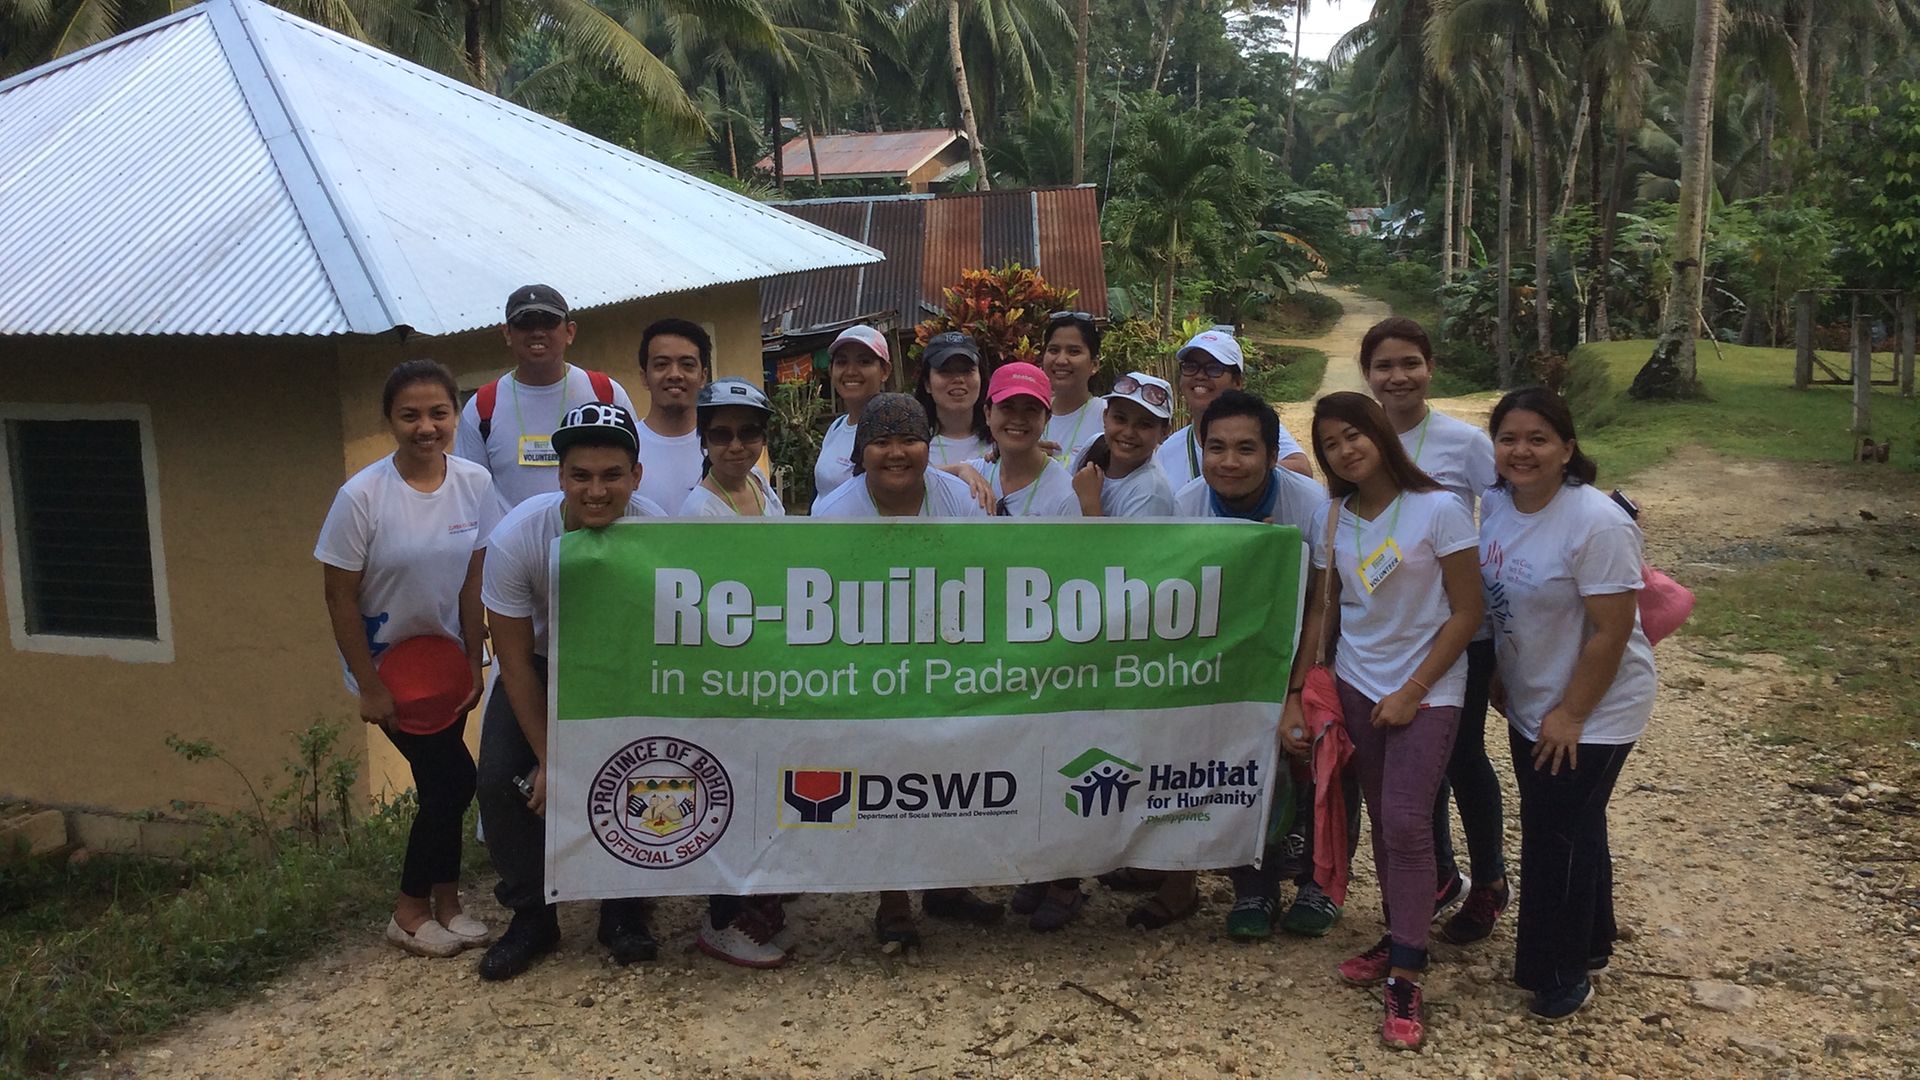 SSC Manila employees had a busy and fulfilling day in Bohol